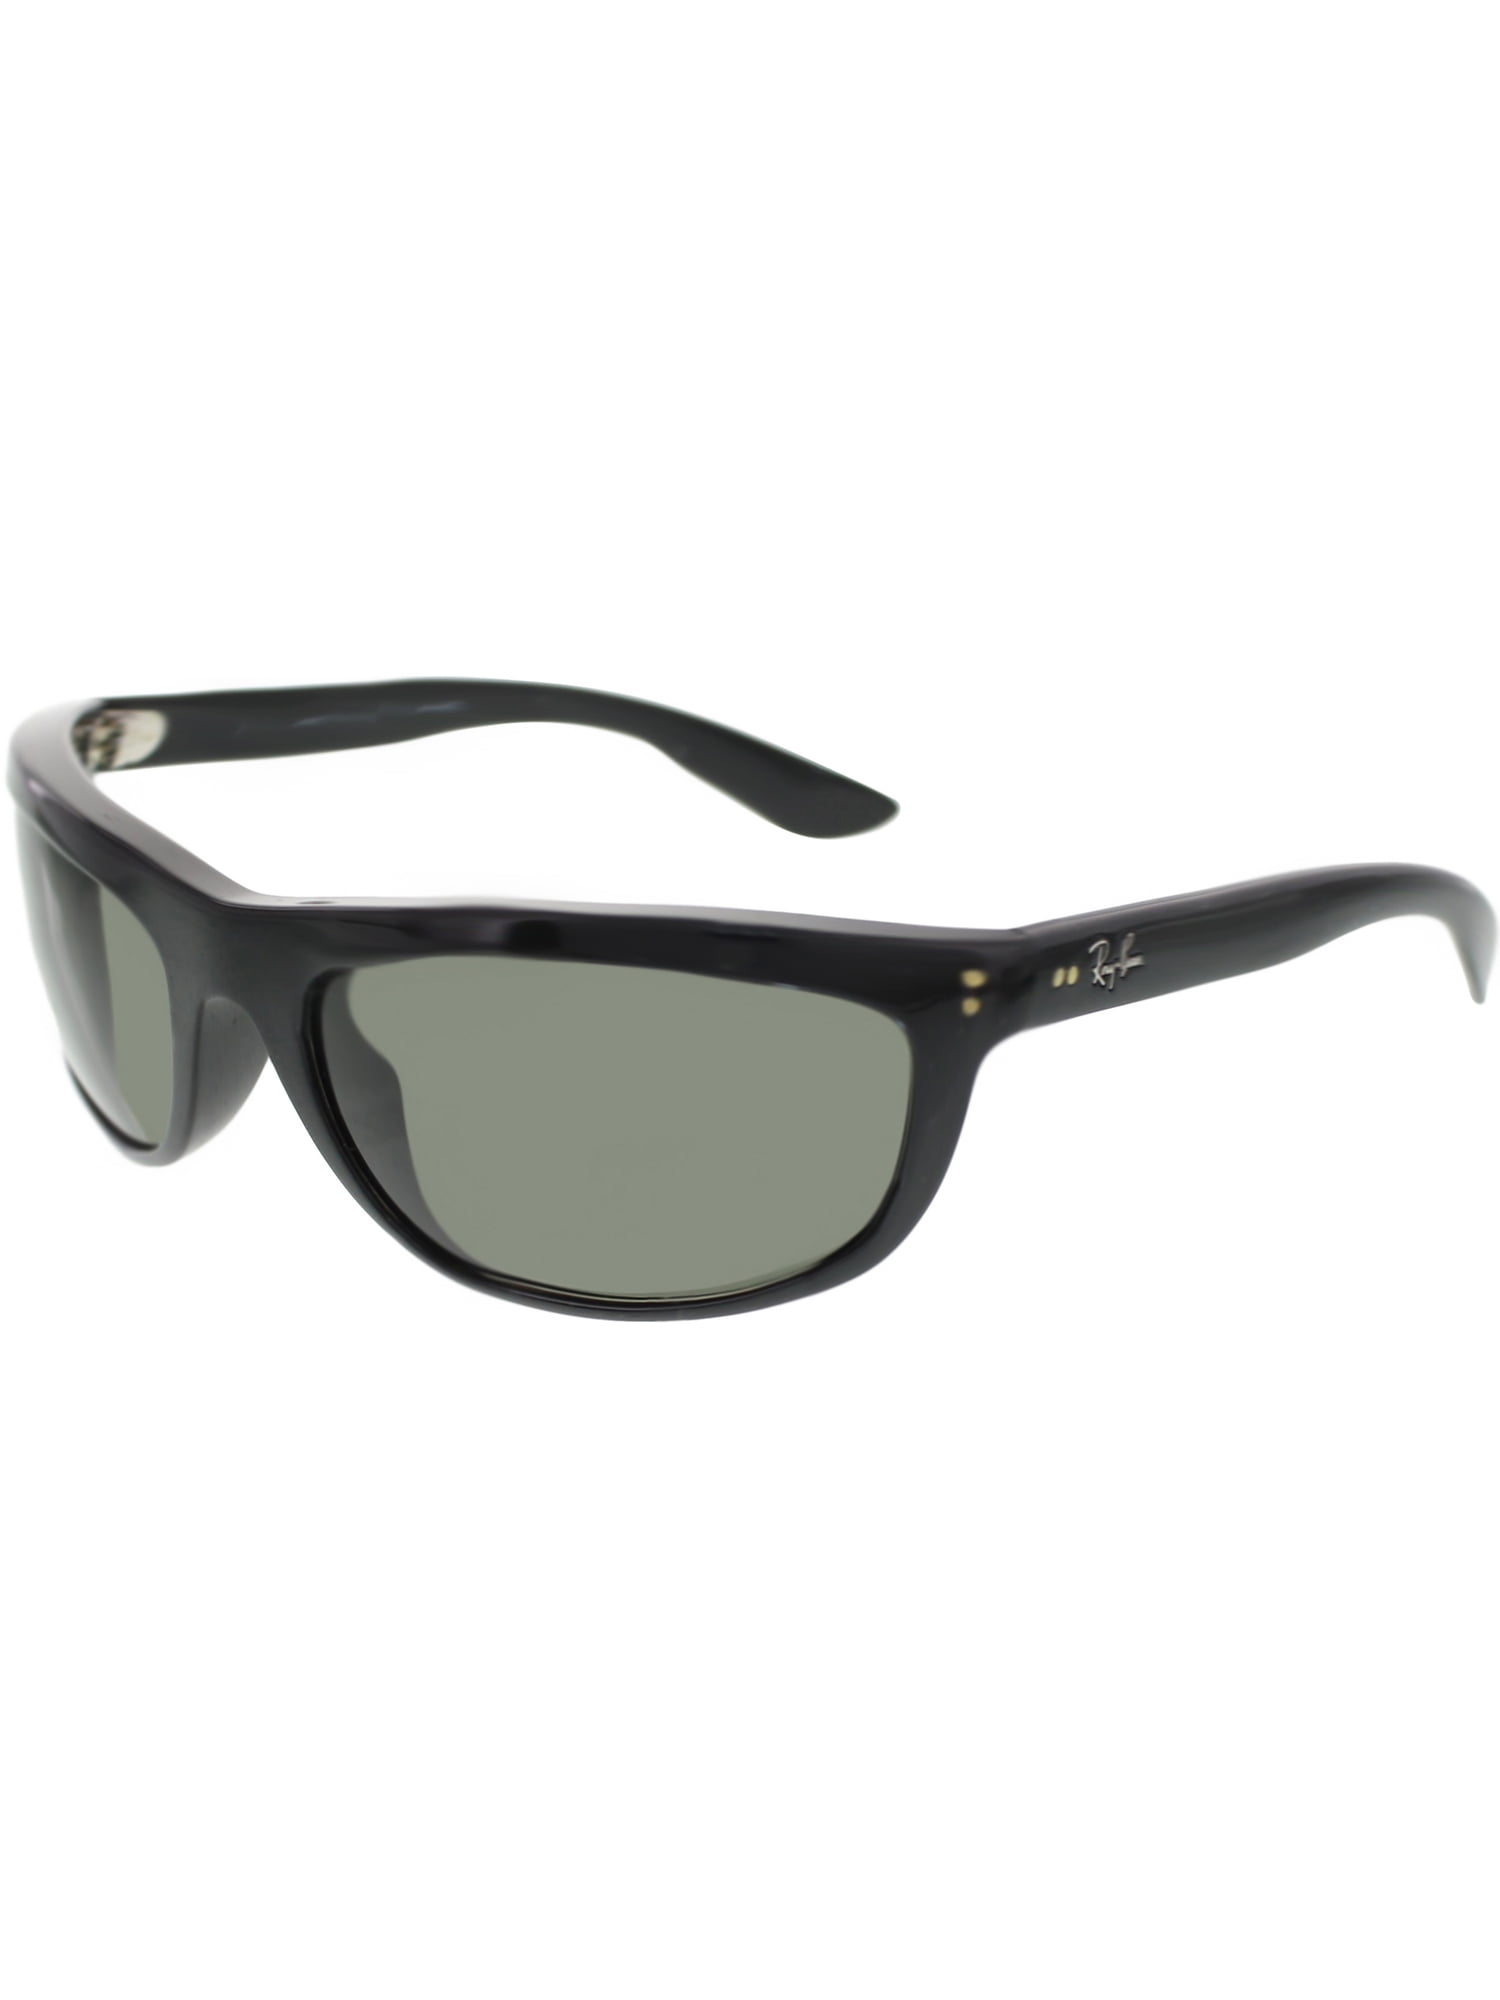 Mix It Up Square Sunglasses S00 - Men - Gifts